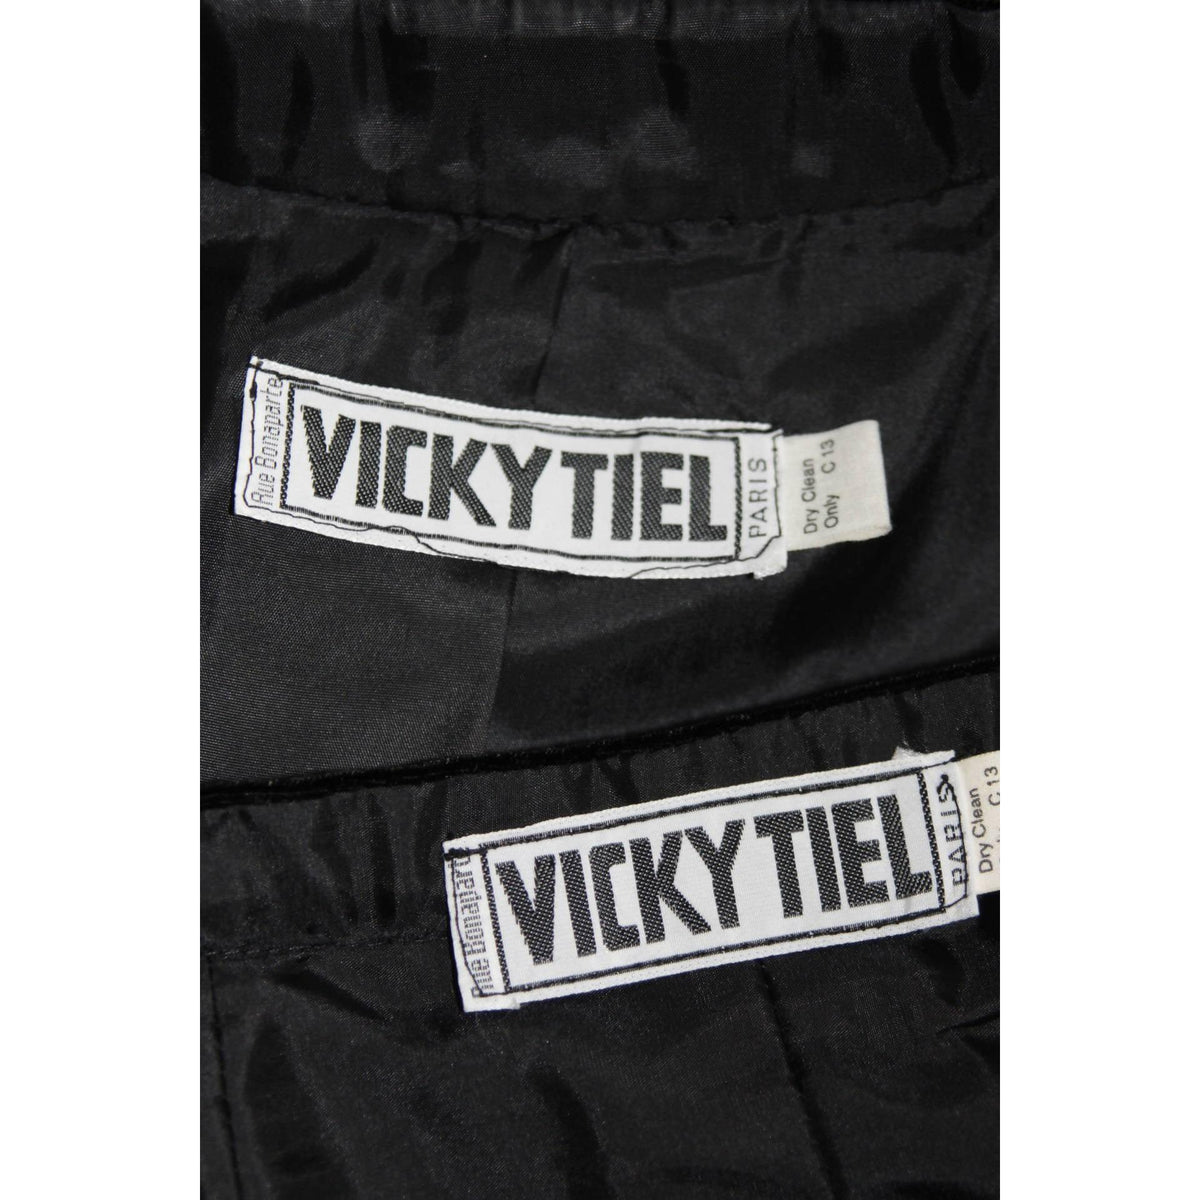 VICKY TIEL Velvet Black Skirt Suit with Rhinestone Buttons | Size S - theREMODA